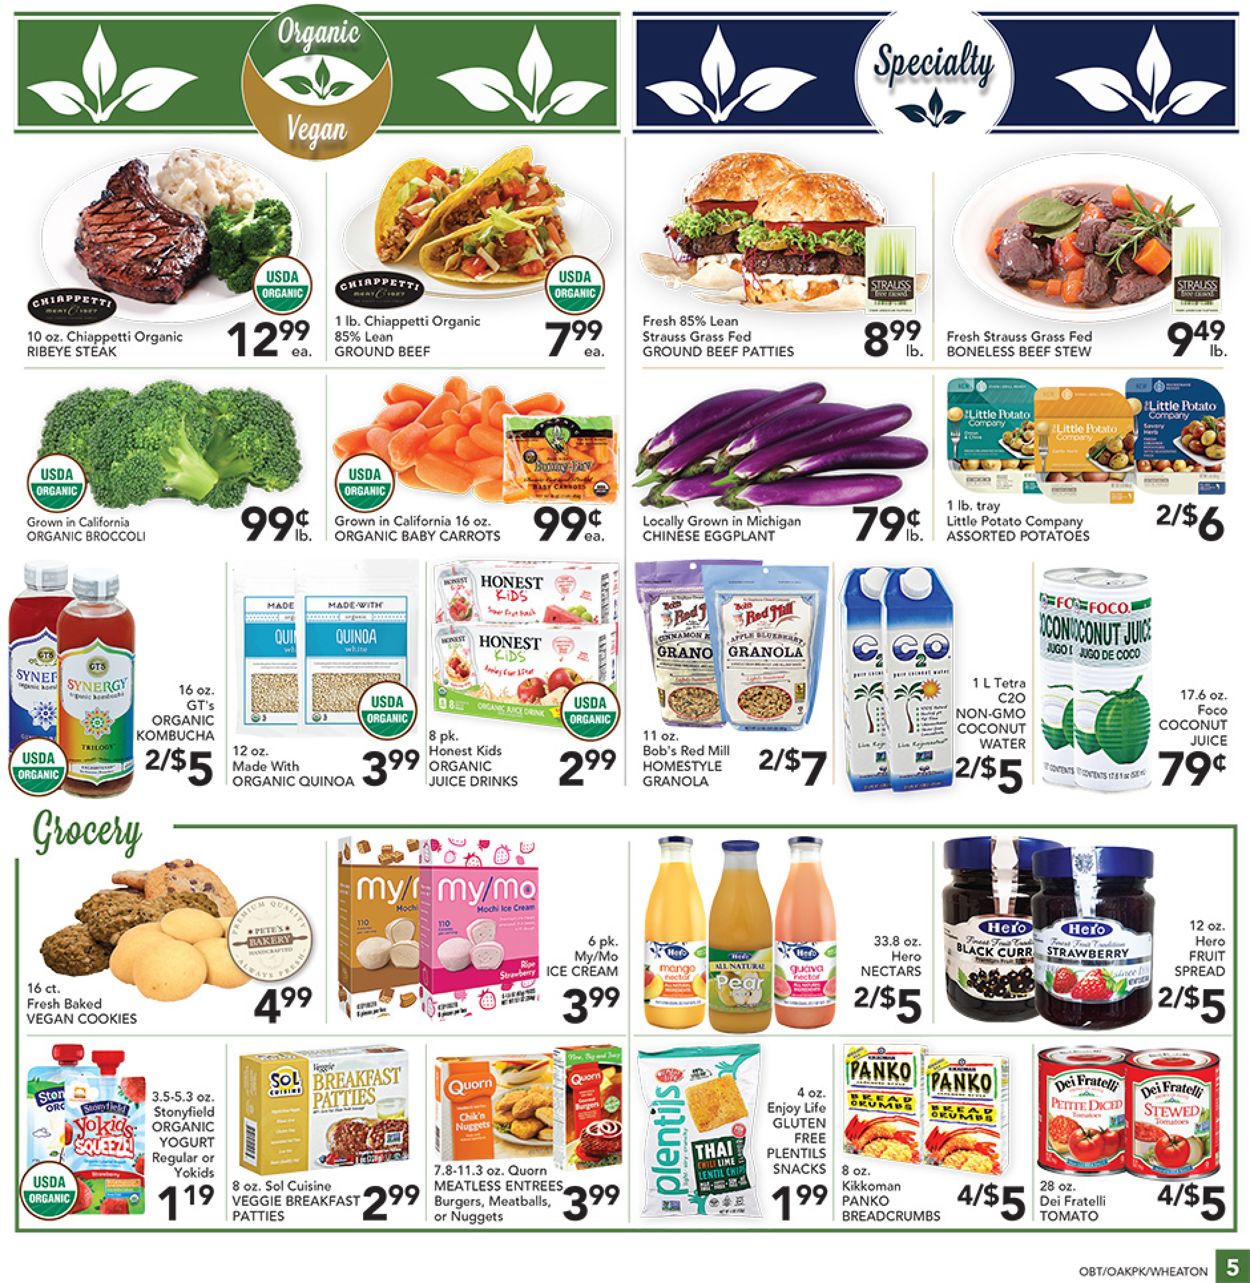 Catalogue Pete's Fresh Market from 08/12/2020